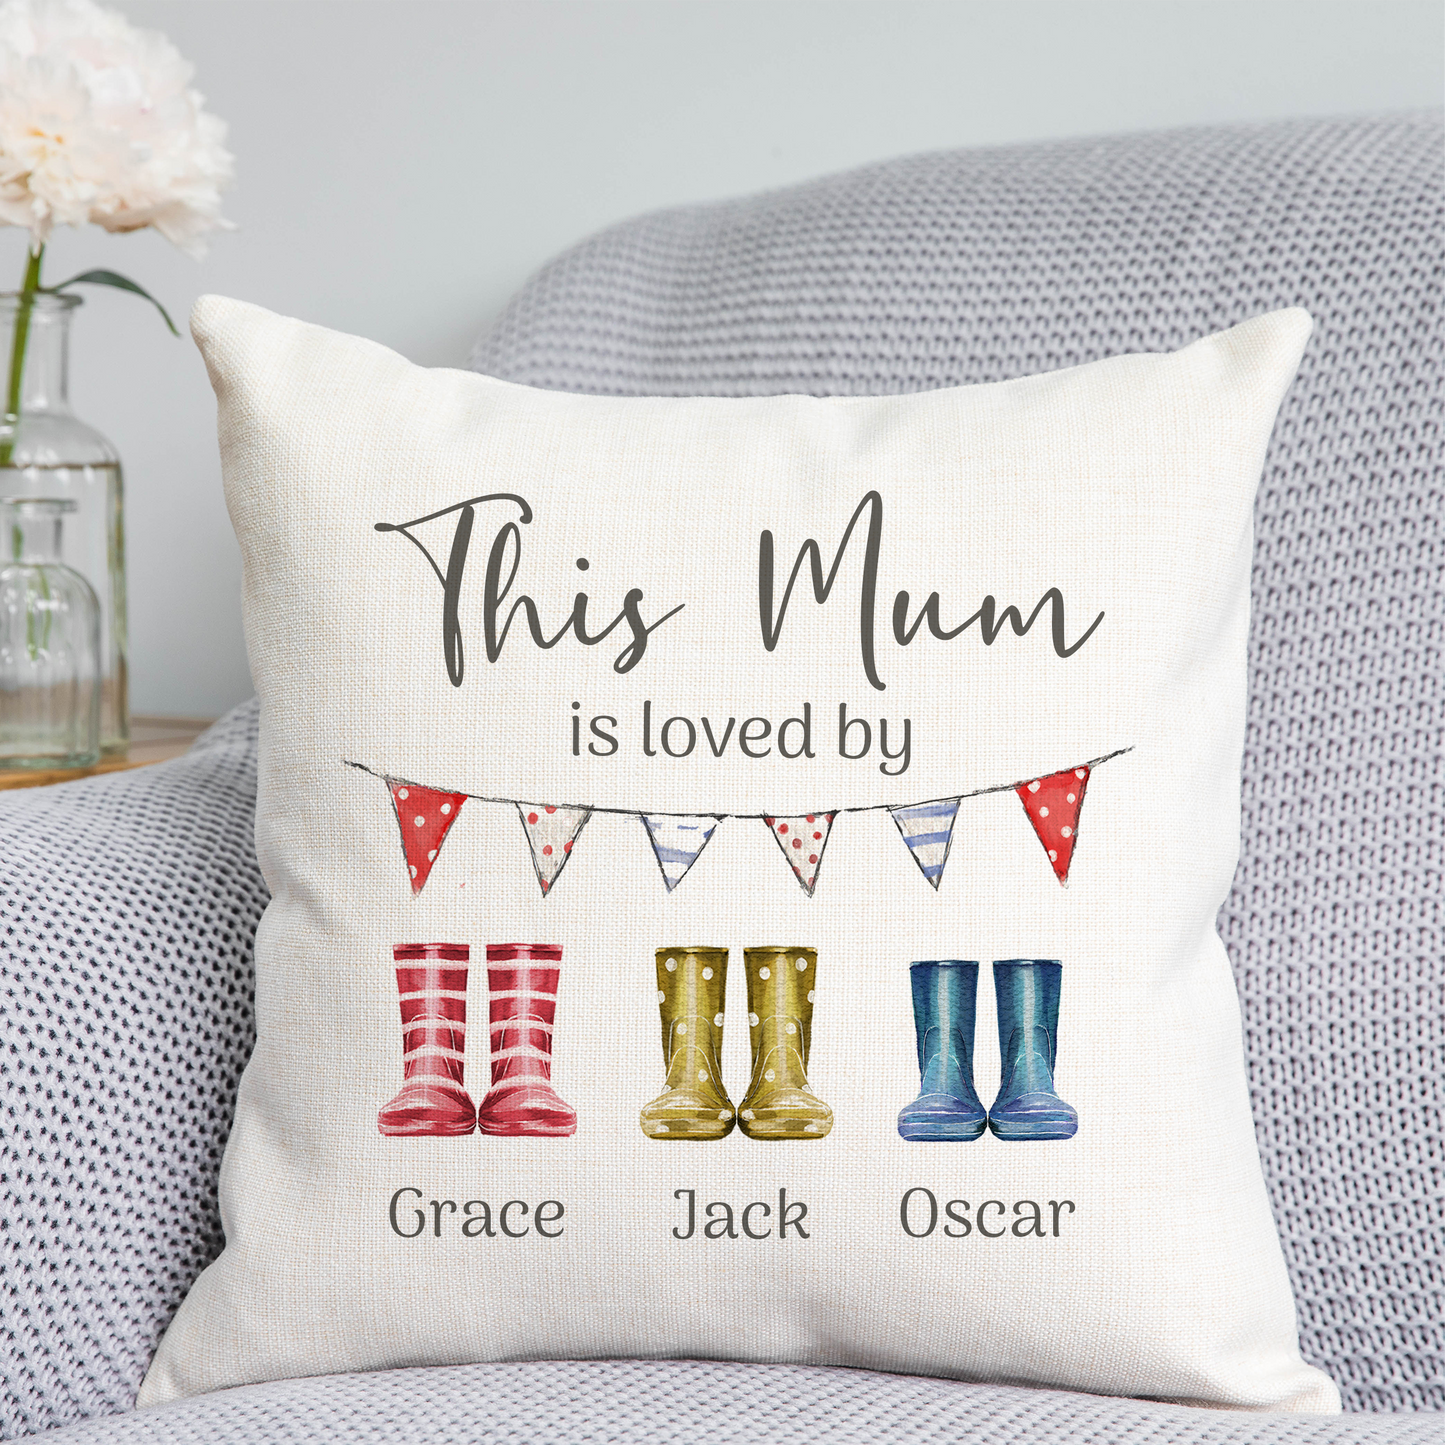 Wellington Boot 'Mummy is loved by' Cushion